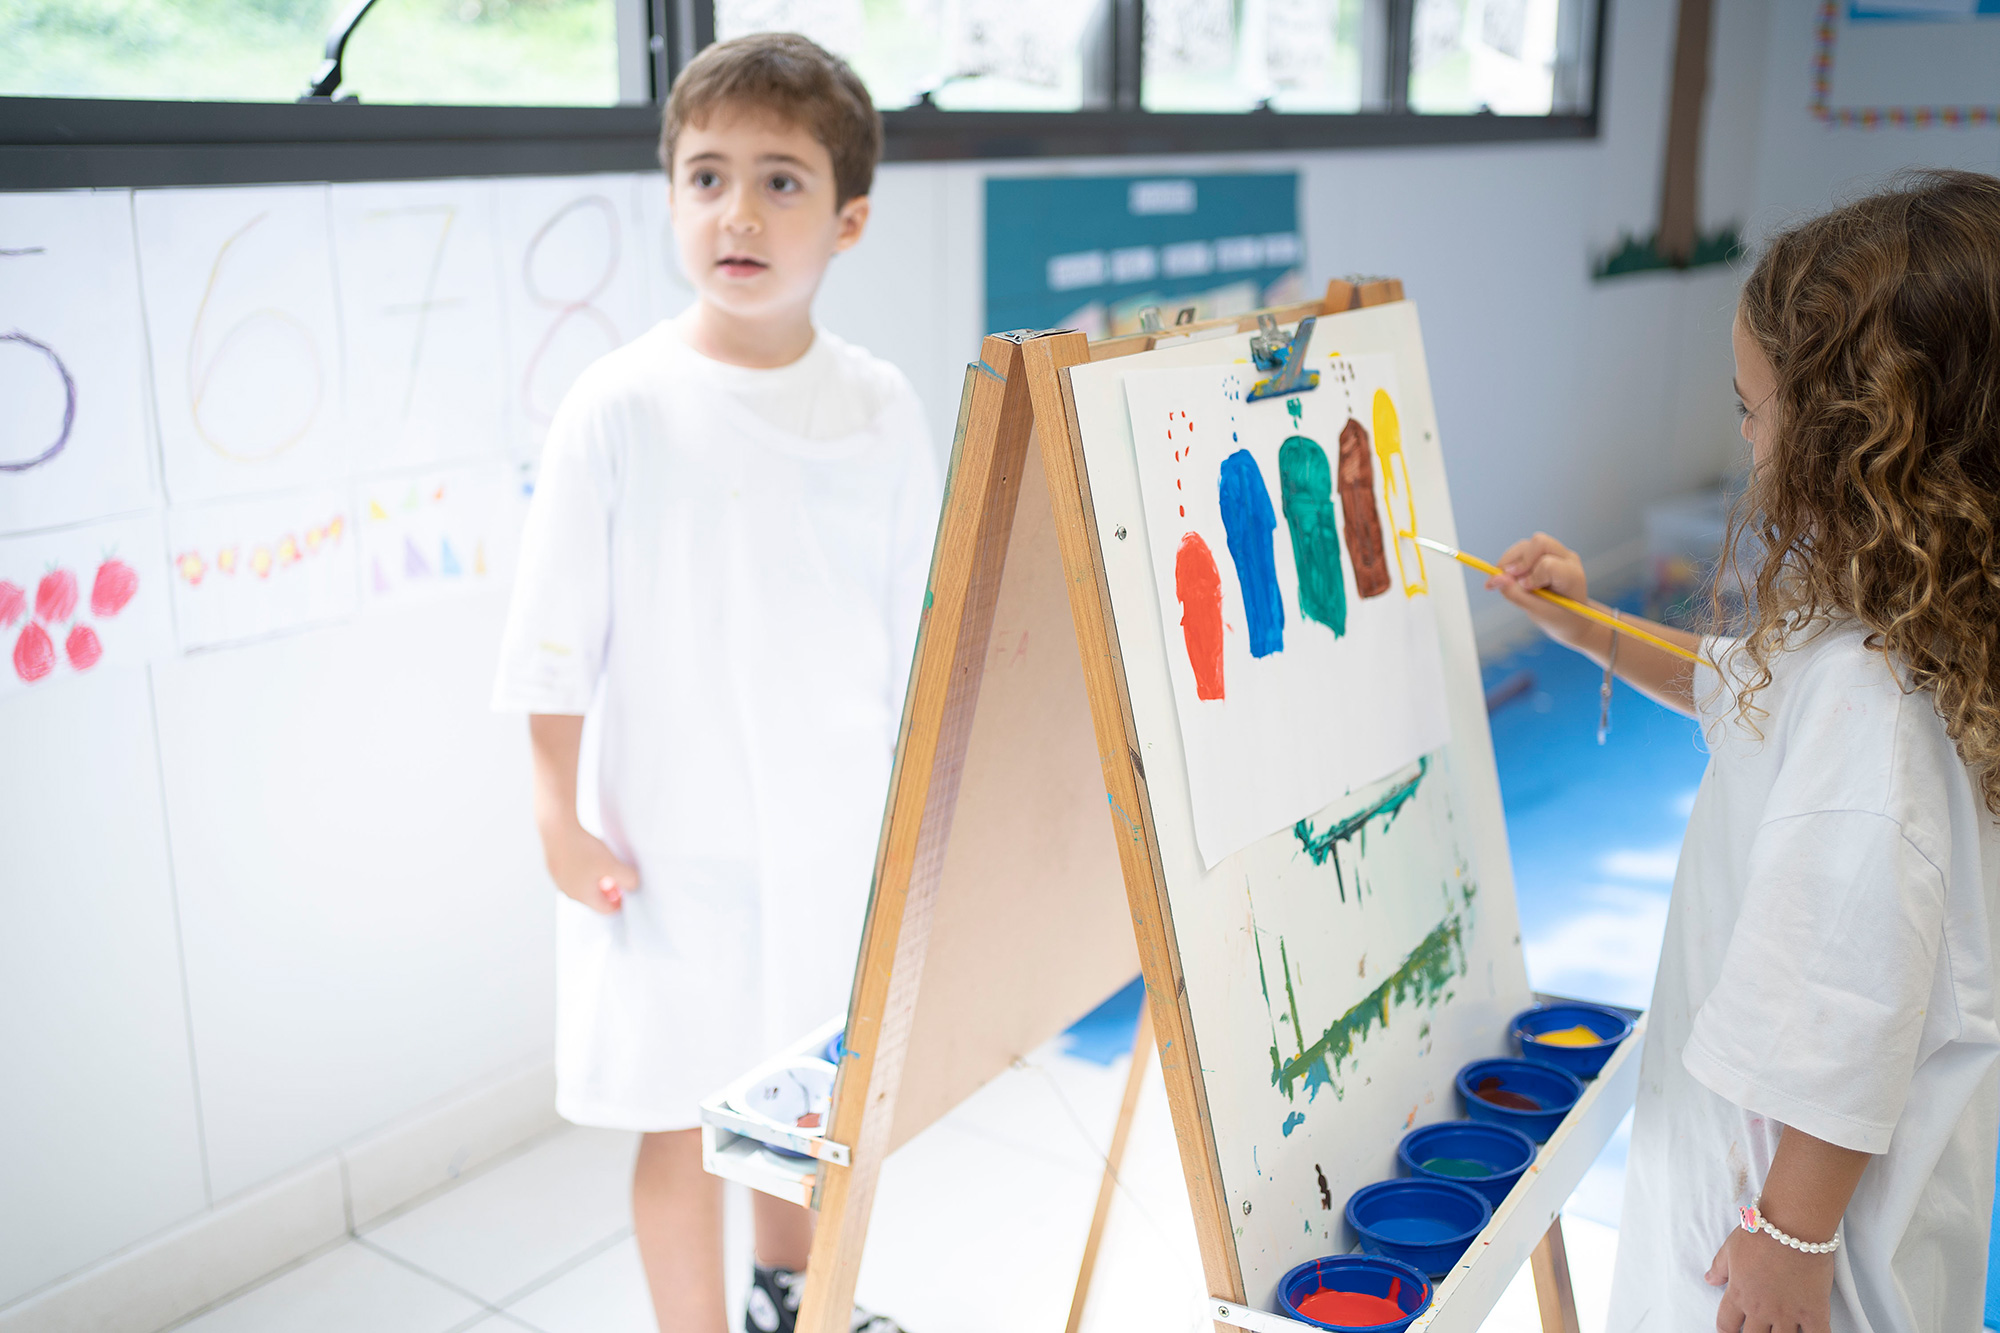 A girl in a painting smock paints coloured elements with a brush on a white sheet of paper at an easel. 	